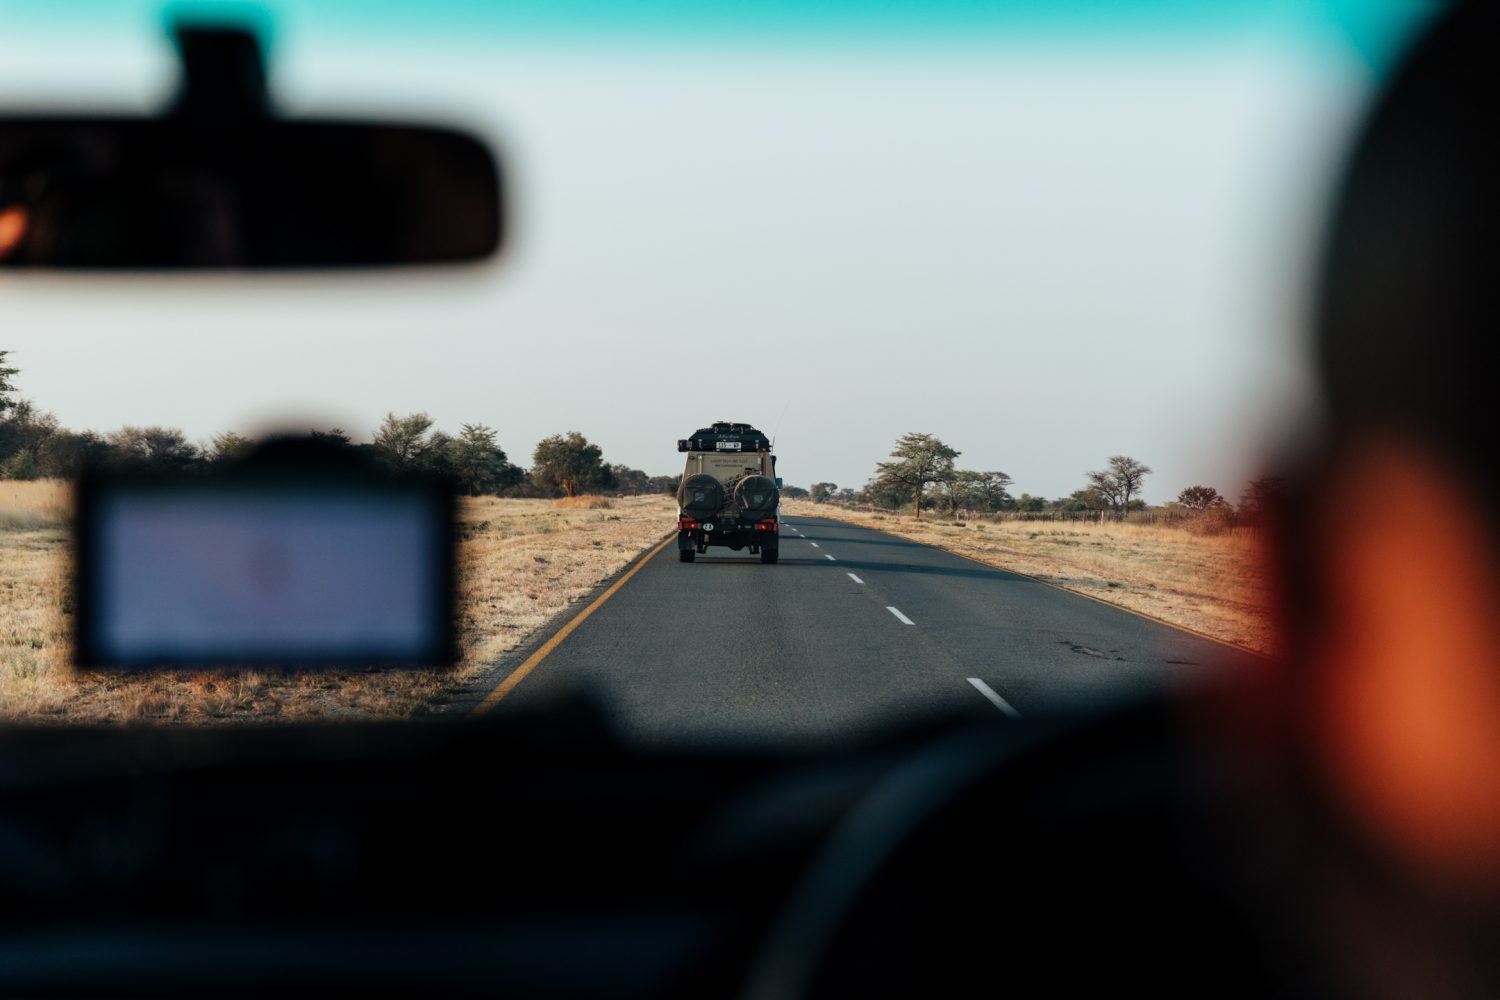 View from a vehicle's interior of a gravel road leading through the rugged terrain of Southern Africa, under a vast sky.